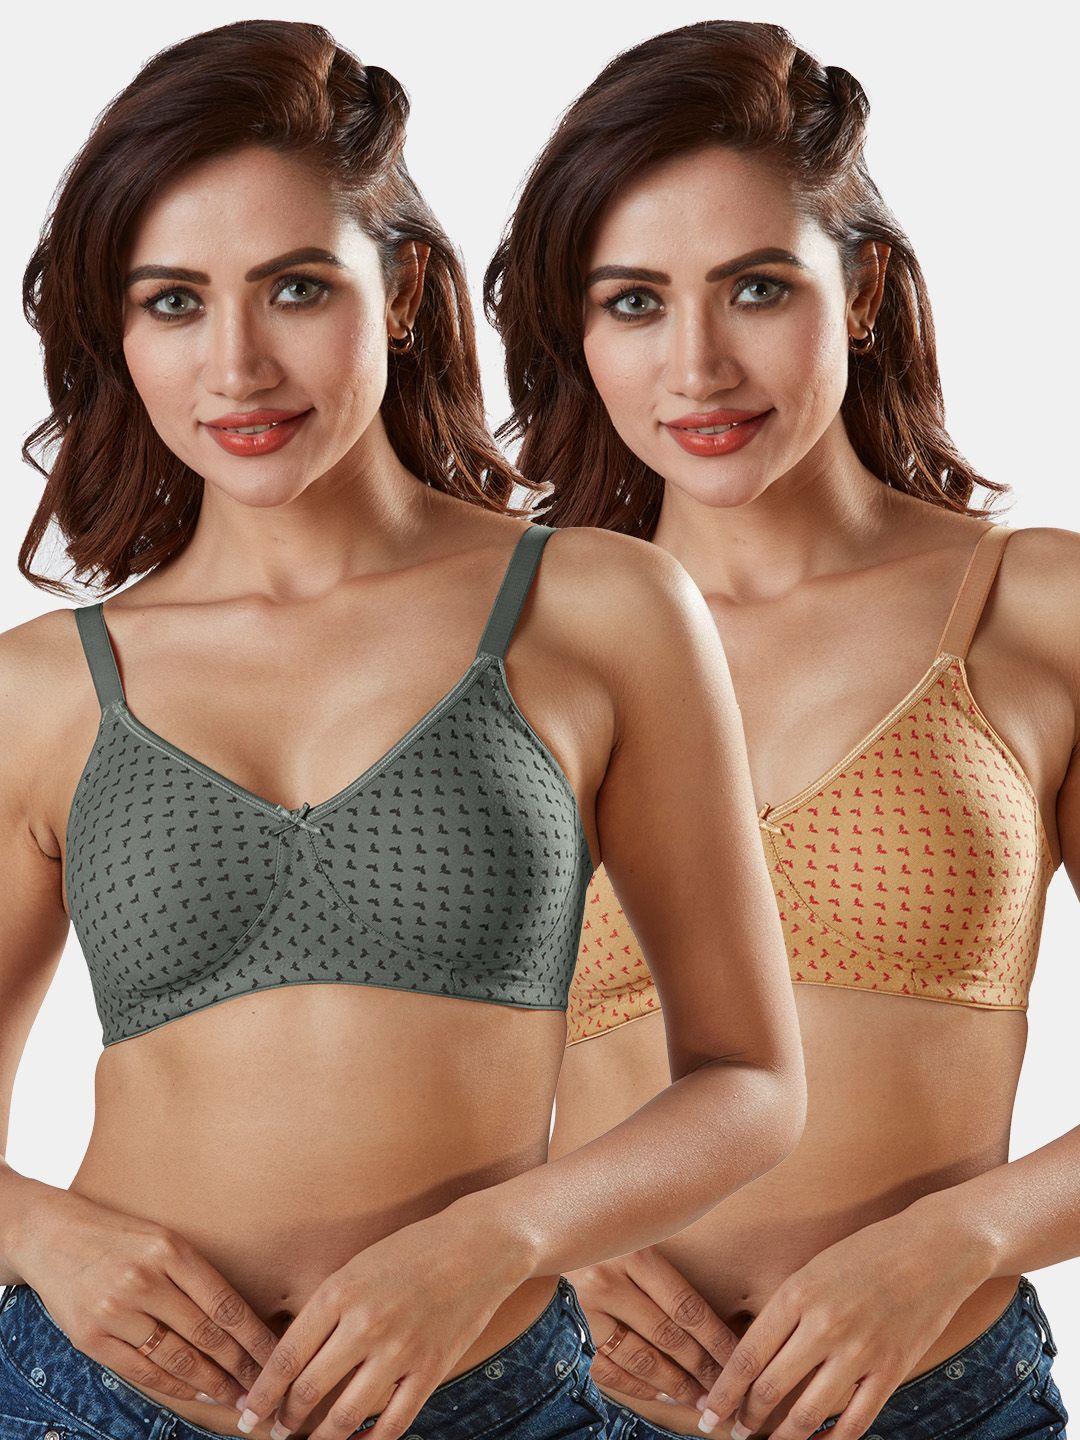 sonari pack of 2 grey & nude-coloured abstract cotton blend t-shirt bras anitagreynude32c